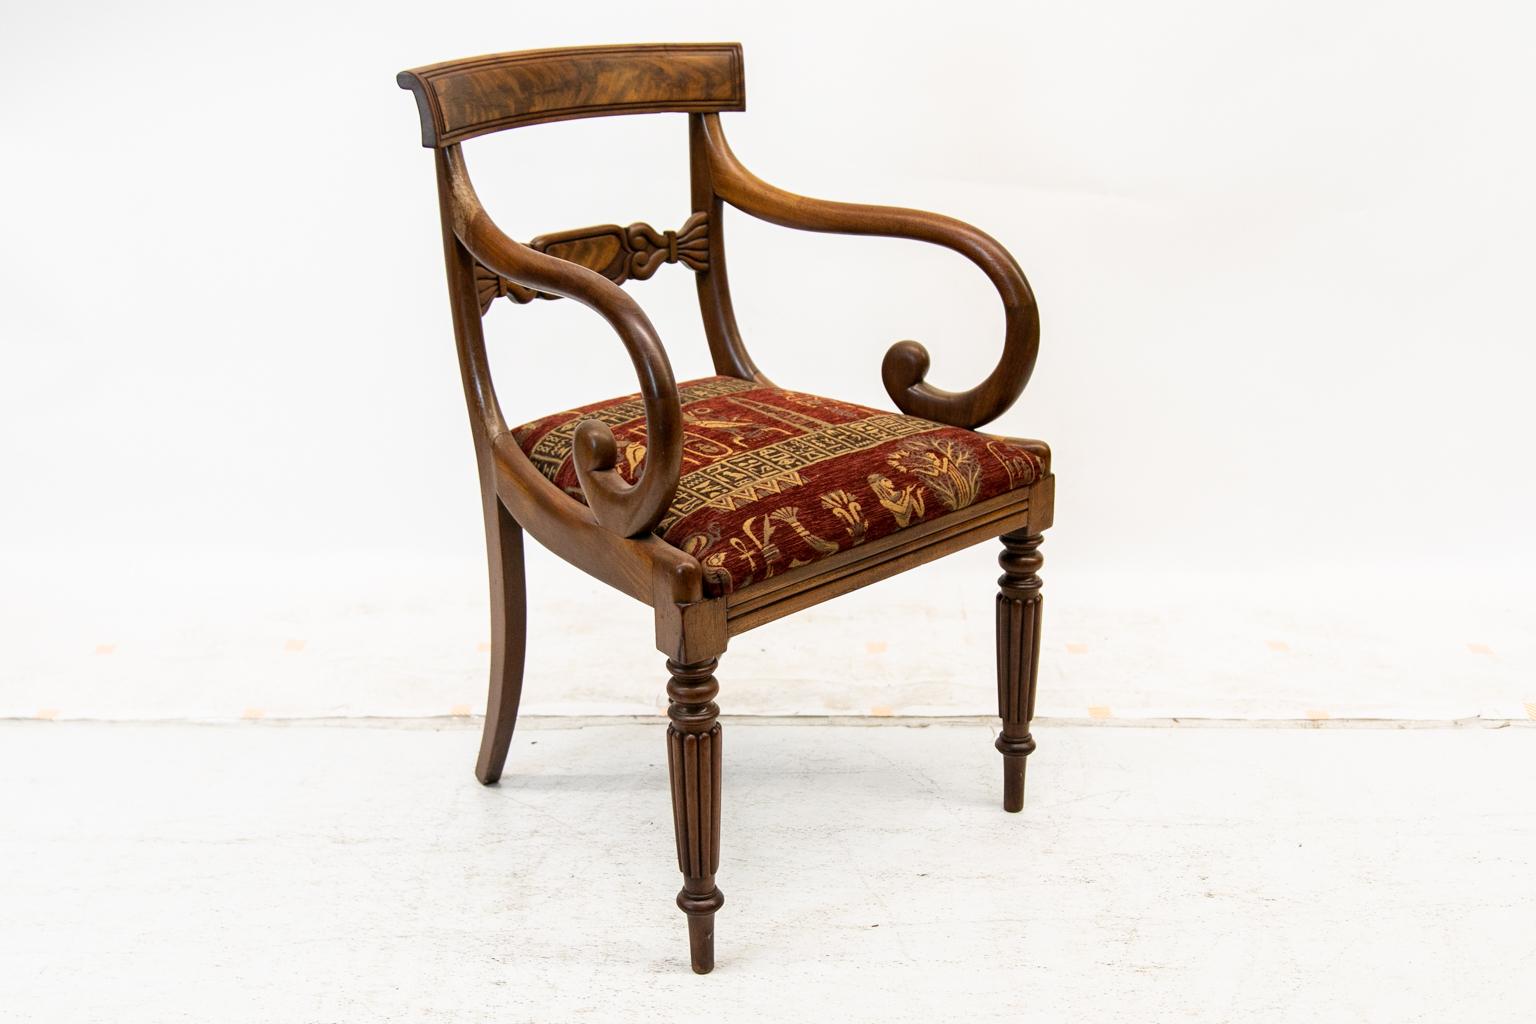 English William IV armchair has a carved crest rail framing a flame grained mahogany panel. The front legs are fluted, and the arms have a scrolled shaping.
  